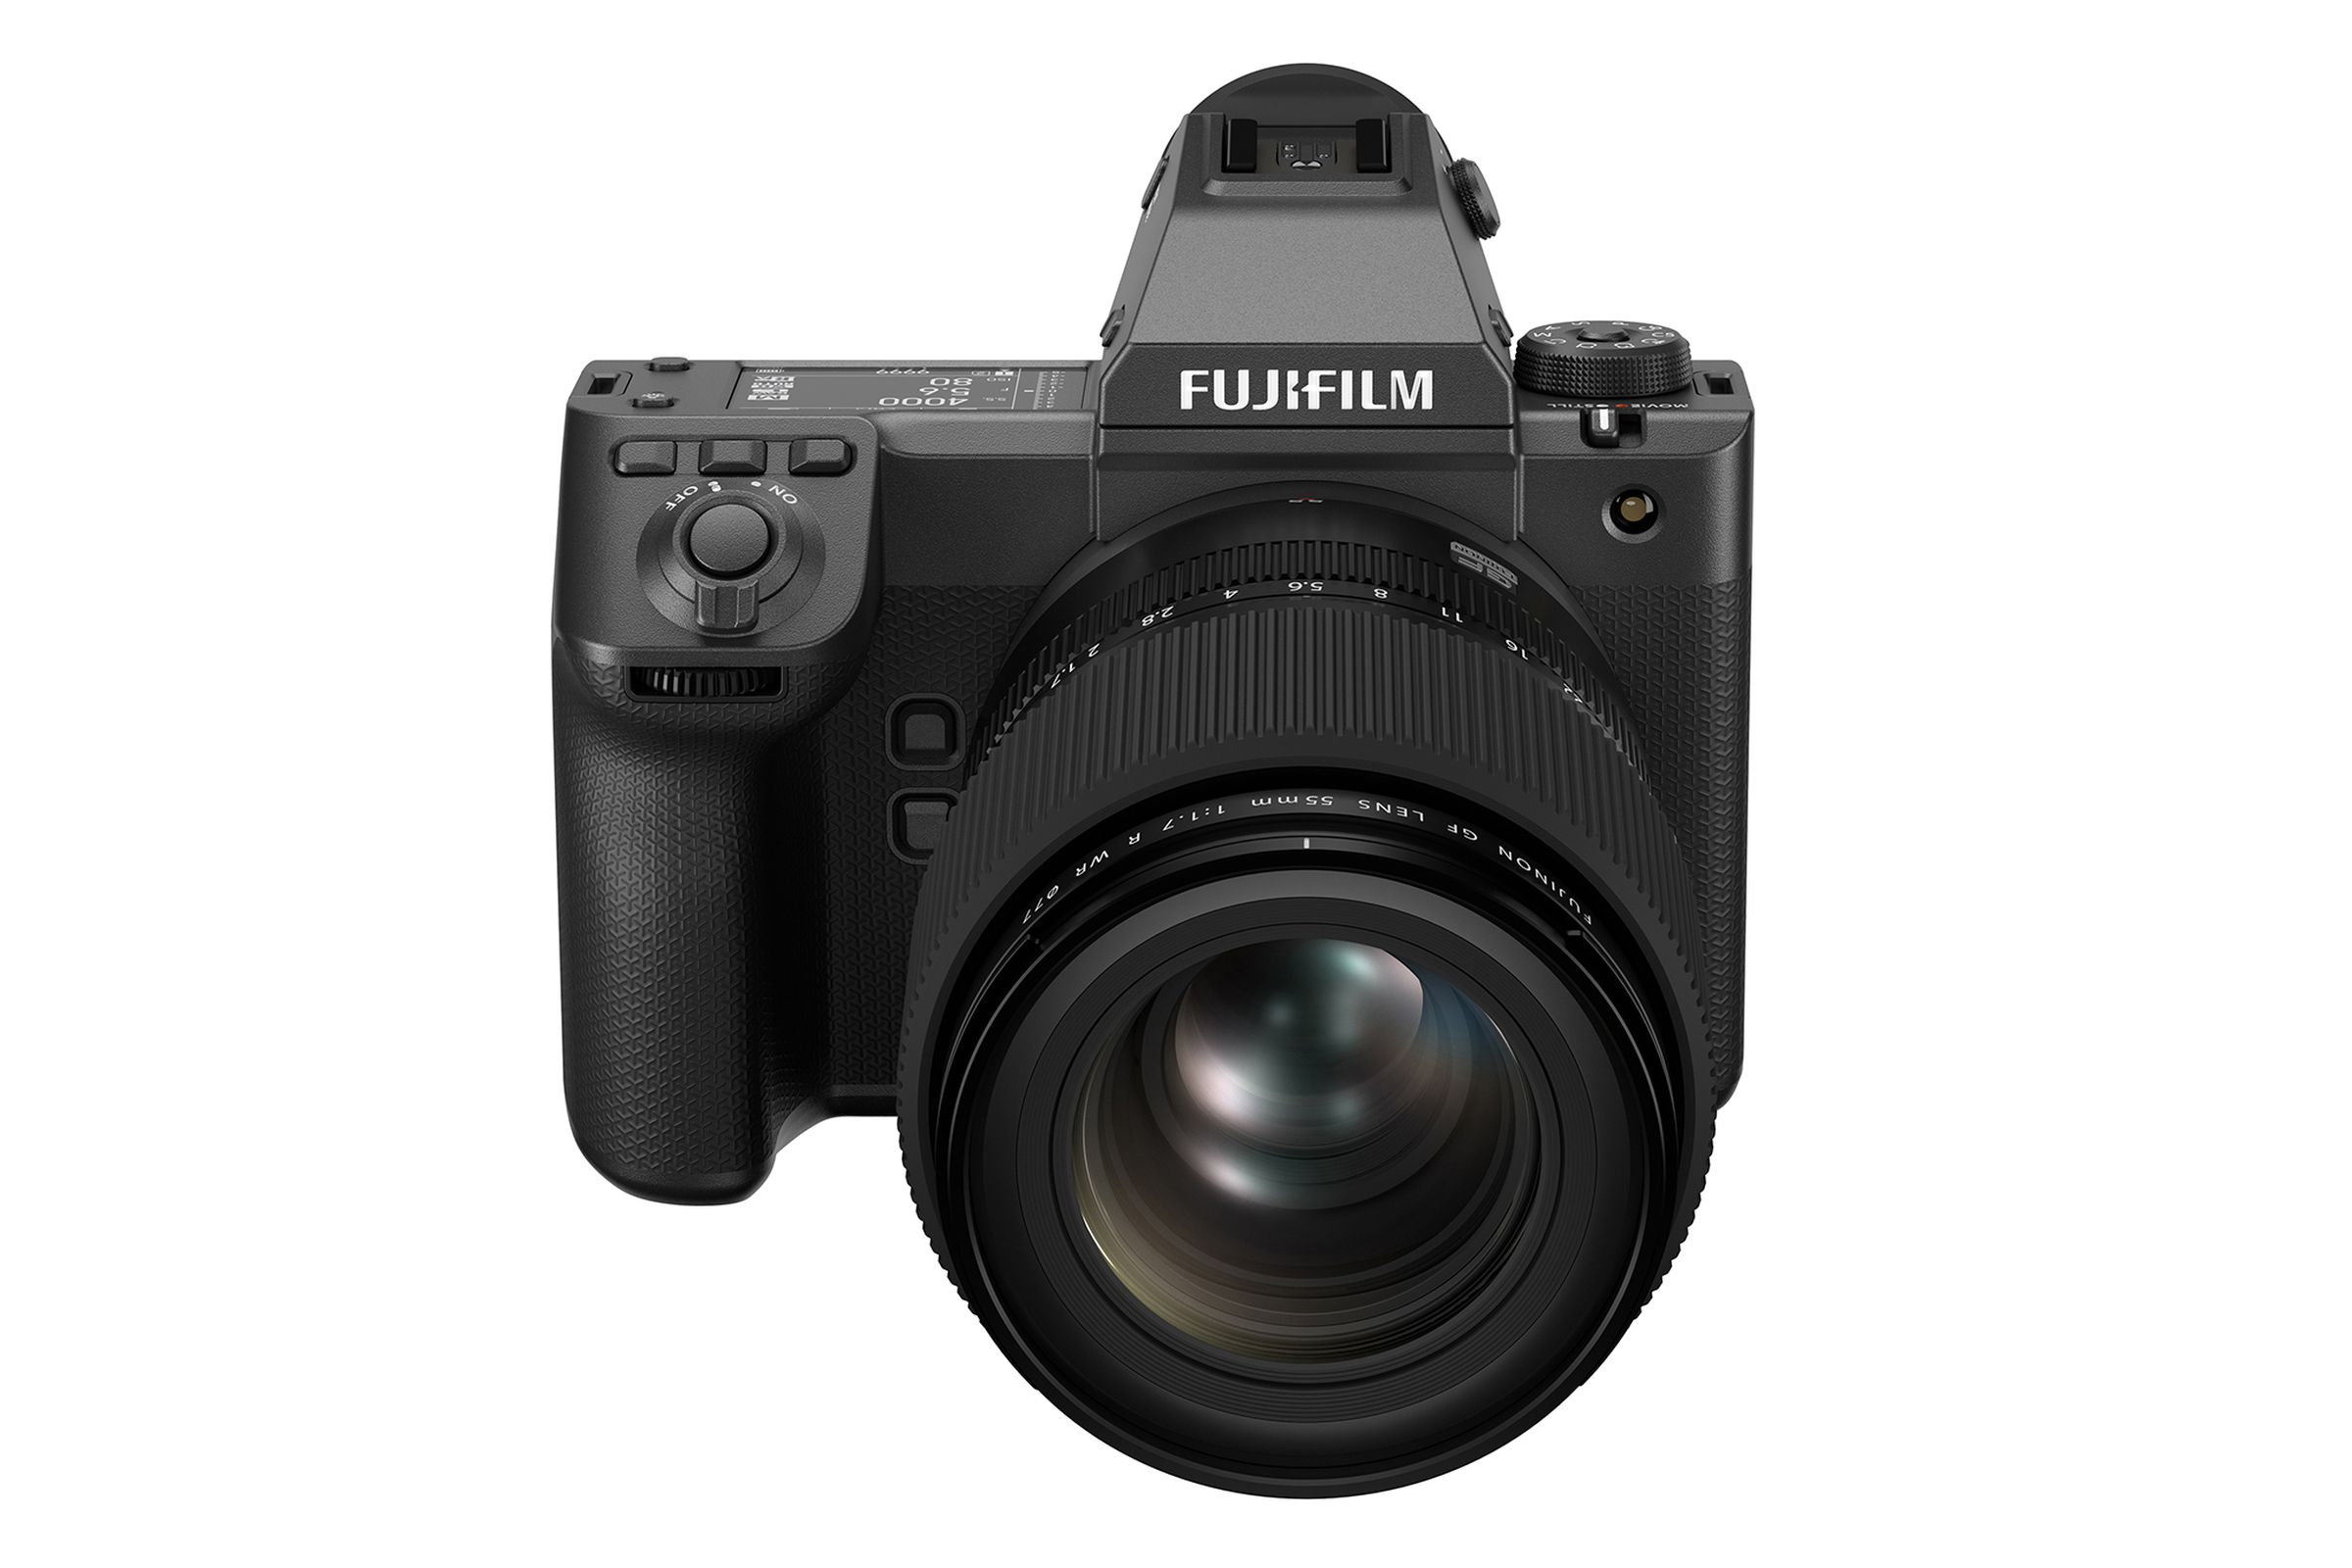 The Fujifilm GFX100 II medium format mirrorless camera with a 55mm f/1.7 lens attached, on a white background.